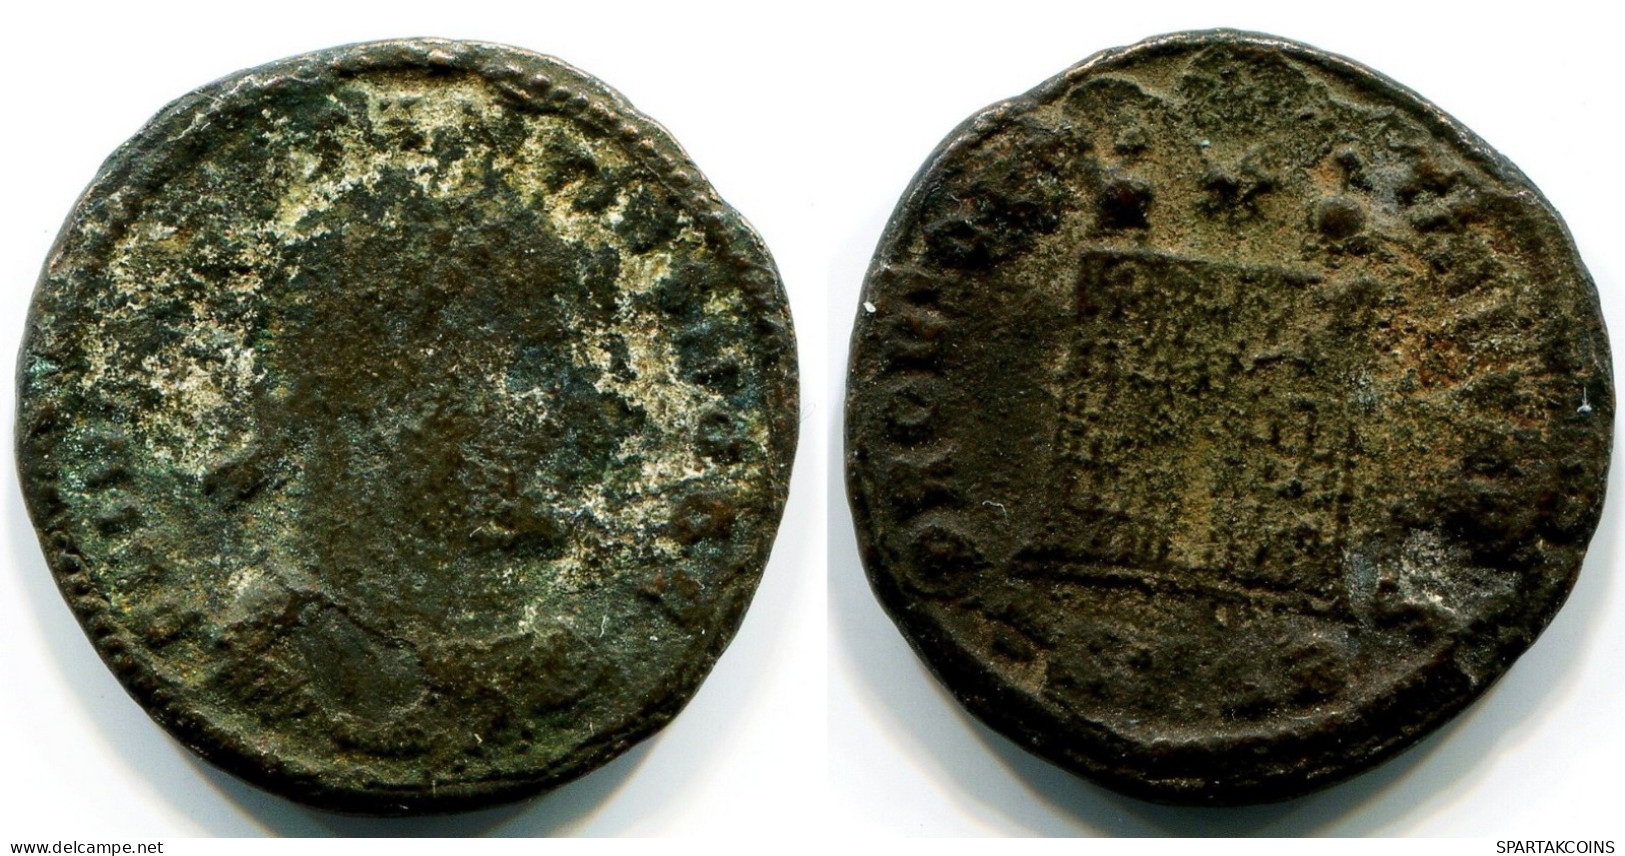 CONSTANTINE I THESSALONICA FROM THE ROYAL ONTARIO MUSEUM #ANC11140.14.E.A - L'Empire Chrétien (307 à 363)